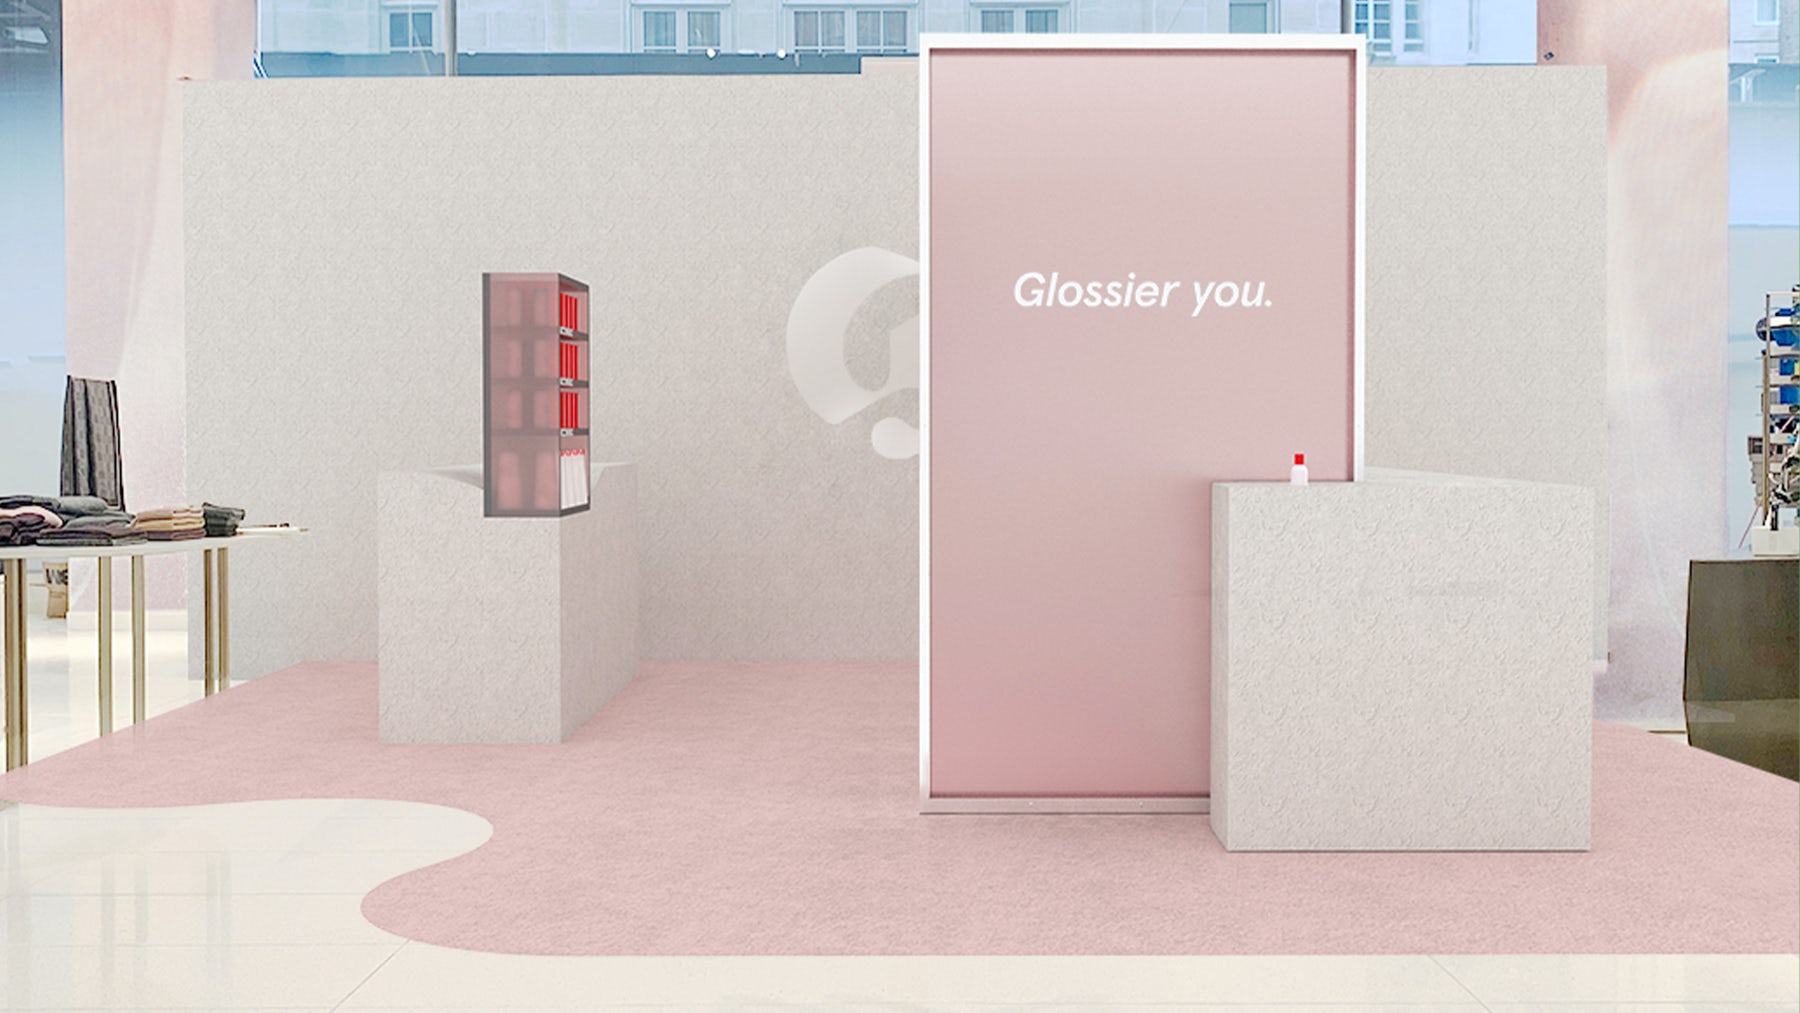 Glossier, LVMH, The Body Shop Join Open to All Inclusive Retail Movement